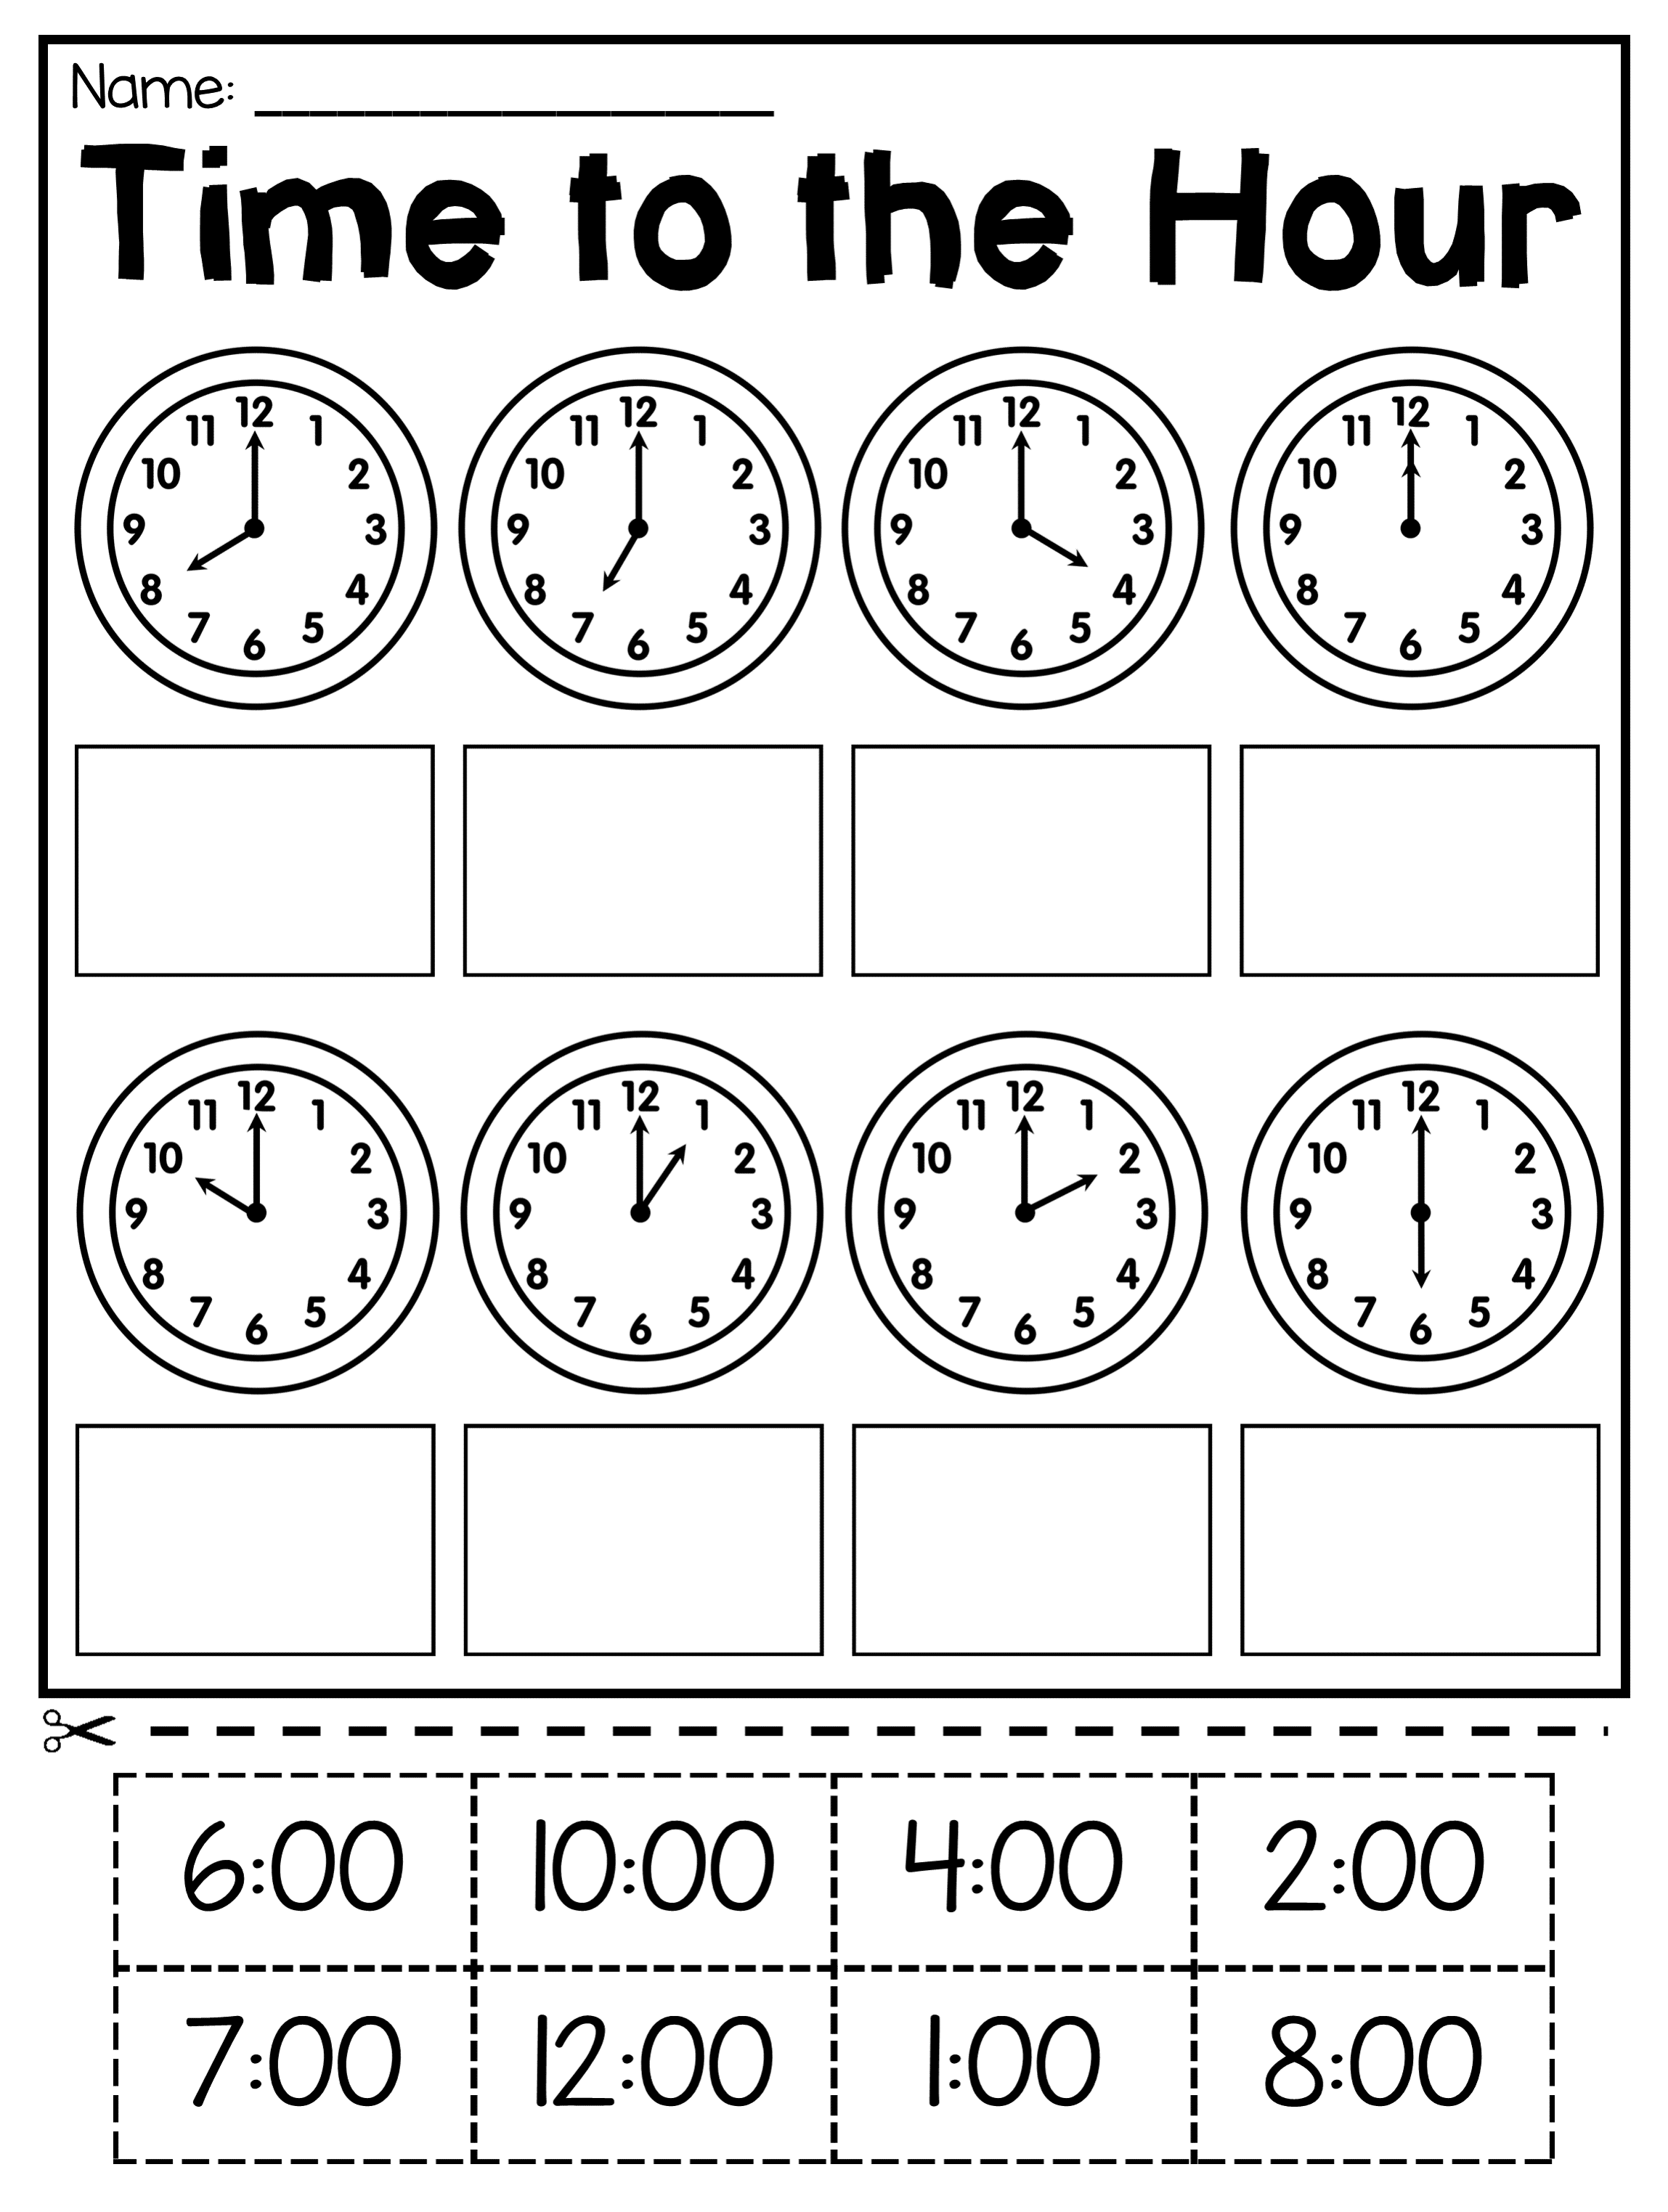 telling-time-to-the-hour-cut-and-paste-worksheets-telling-time-worksheets